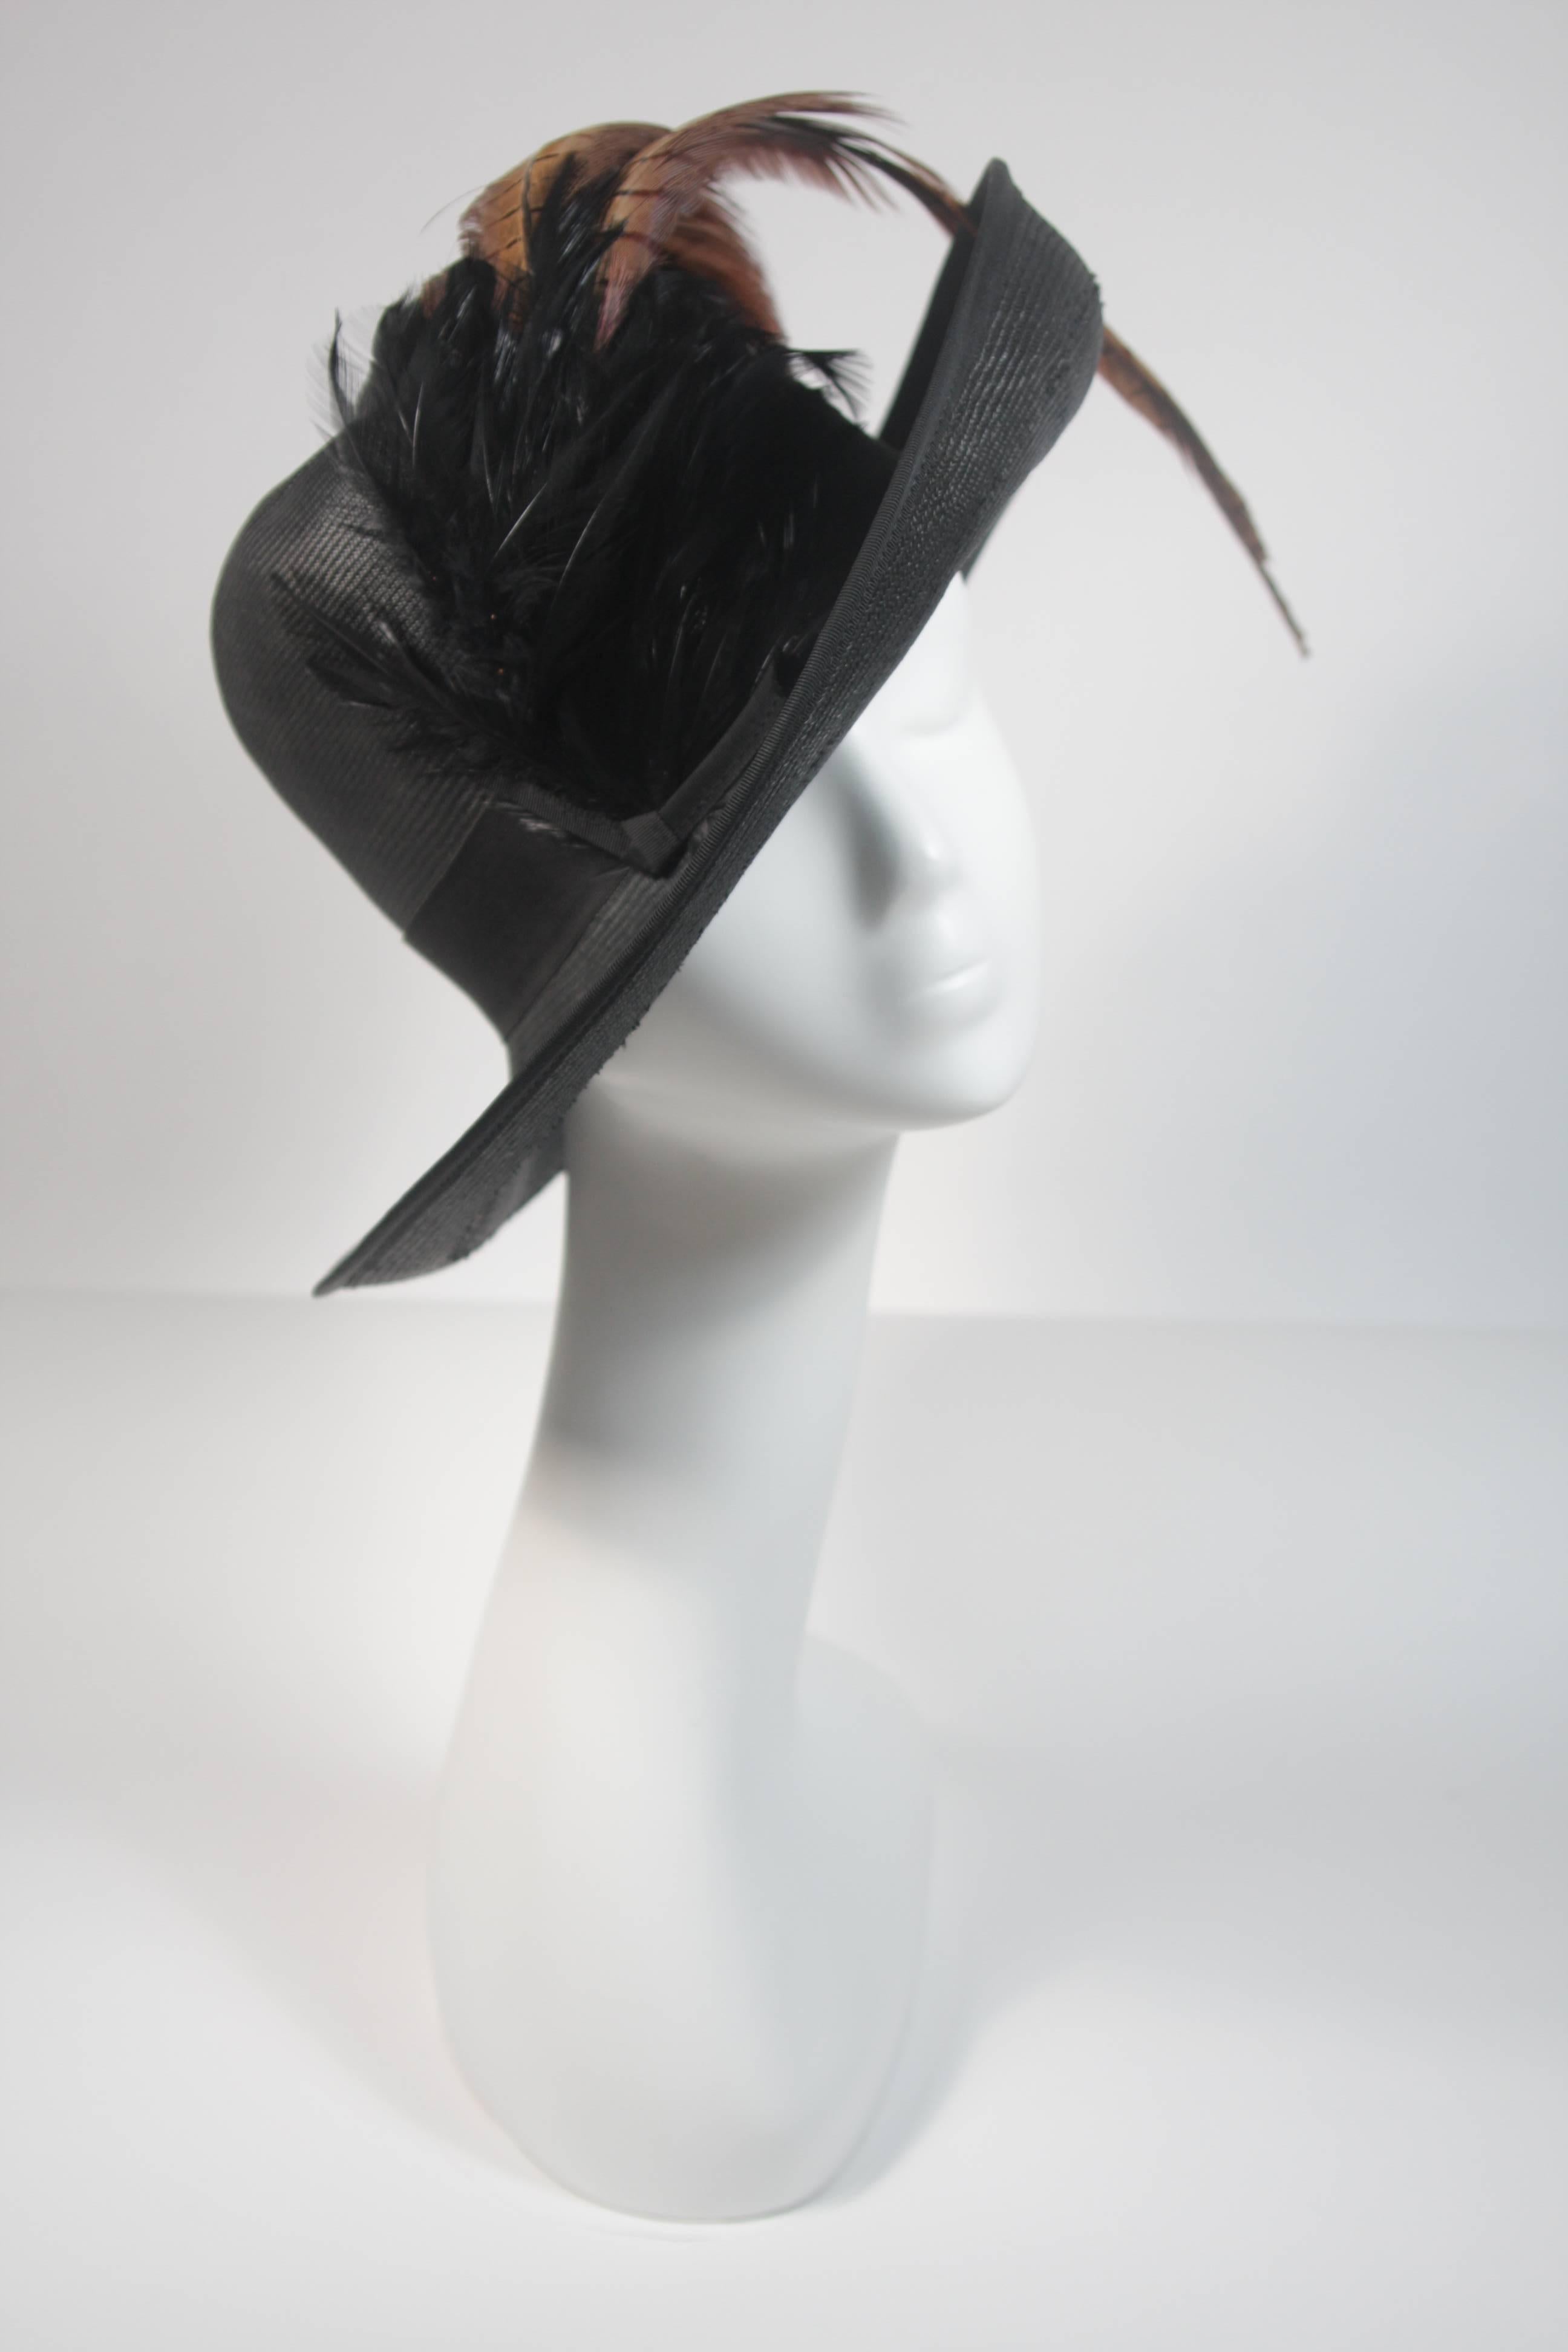 This Mr. Charles hat is composed of a black woven material and features an array of natural color feathers. In excellent vintage condition. 

**Please cross-reference measurements for personal accuracy. 

Measurements (Approximately)  
Height: